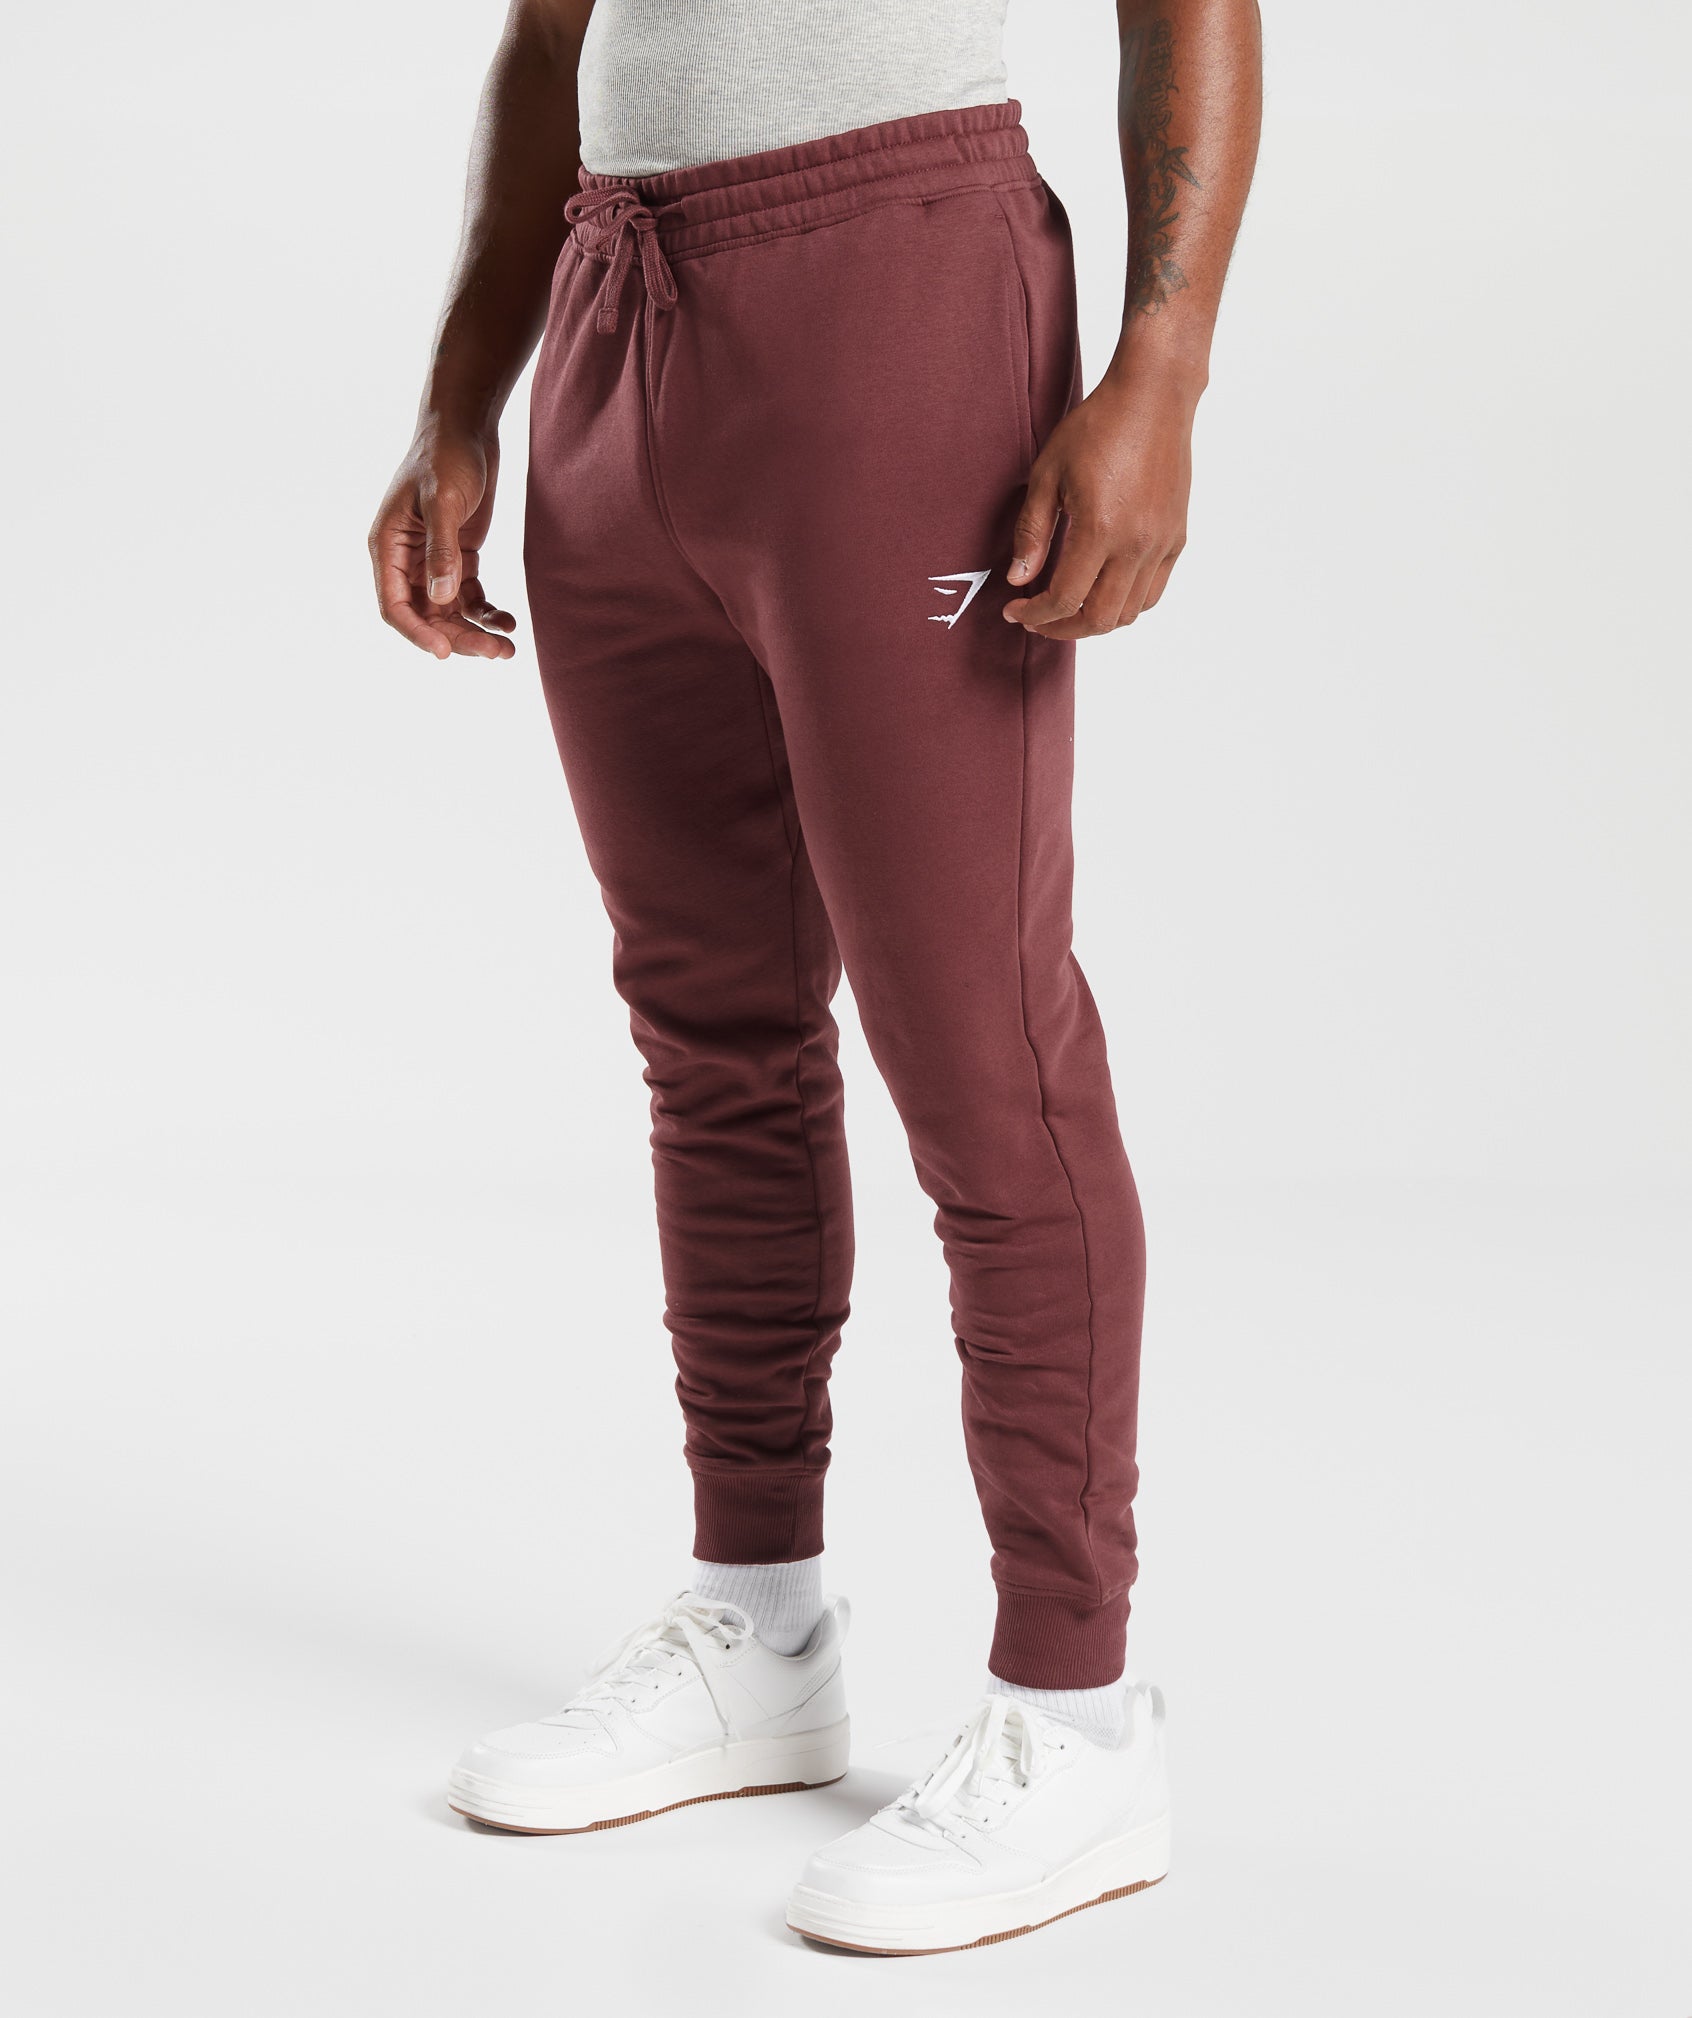 Crest Joggers in Washed Burgundy - view 3